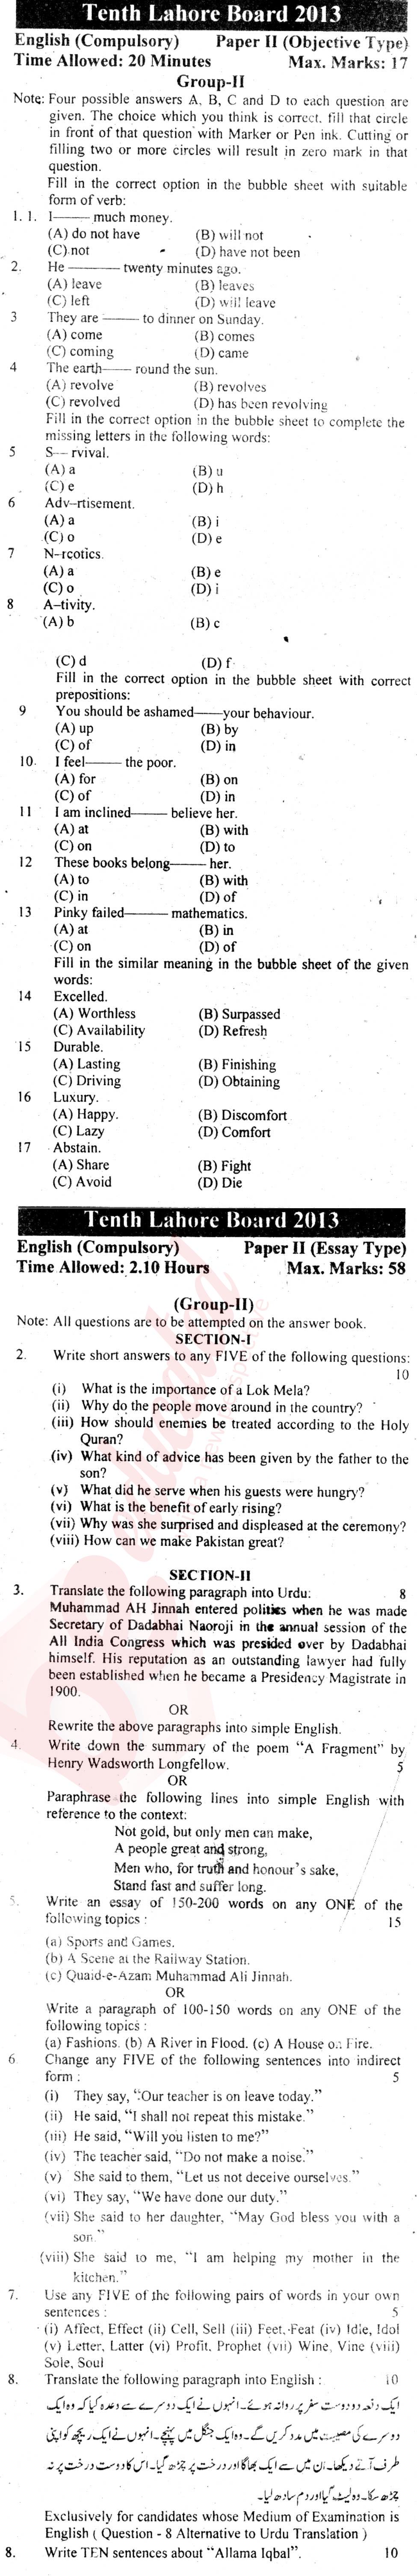 English 10th class Past Paper Group 2 BISE Lahore 2013